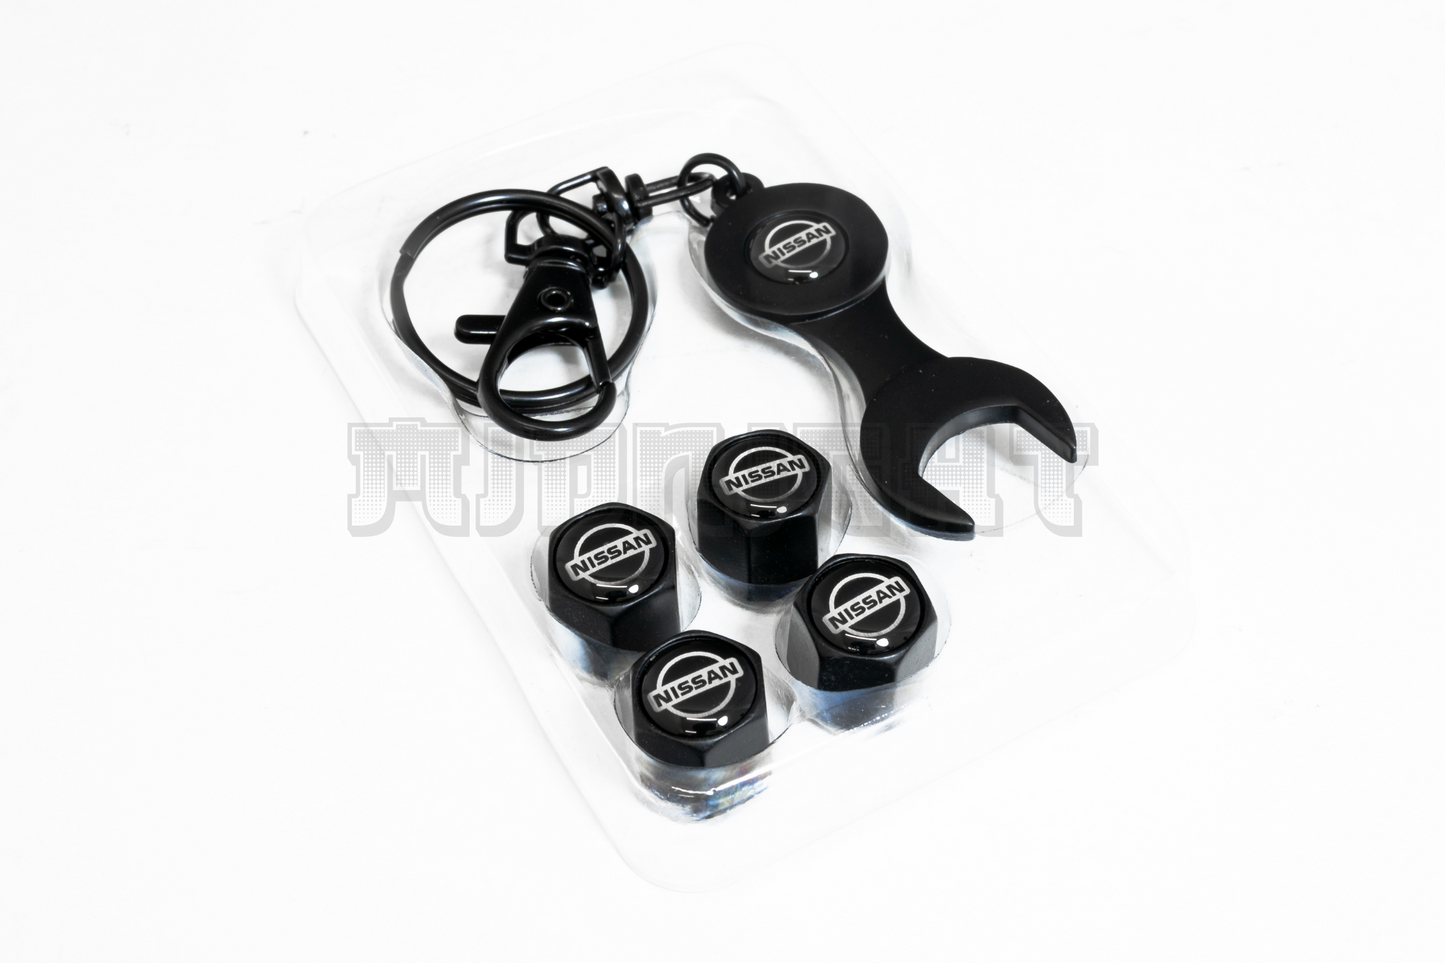 Nissan Valve Stem Caps With Wrench Keychain